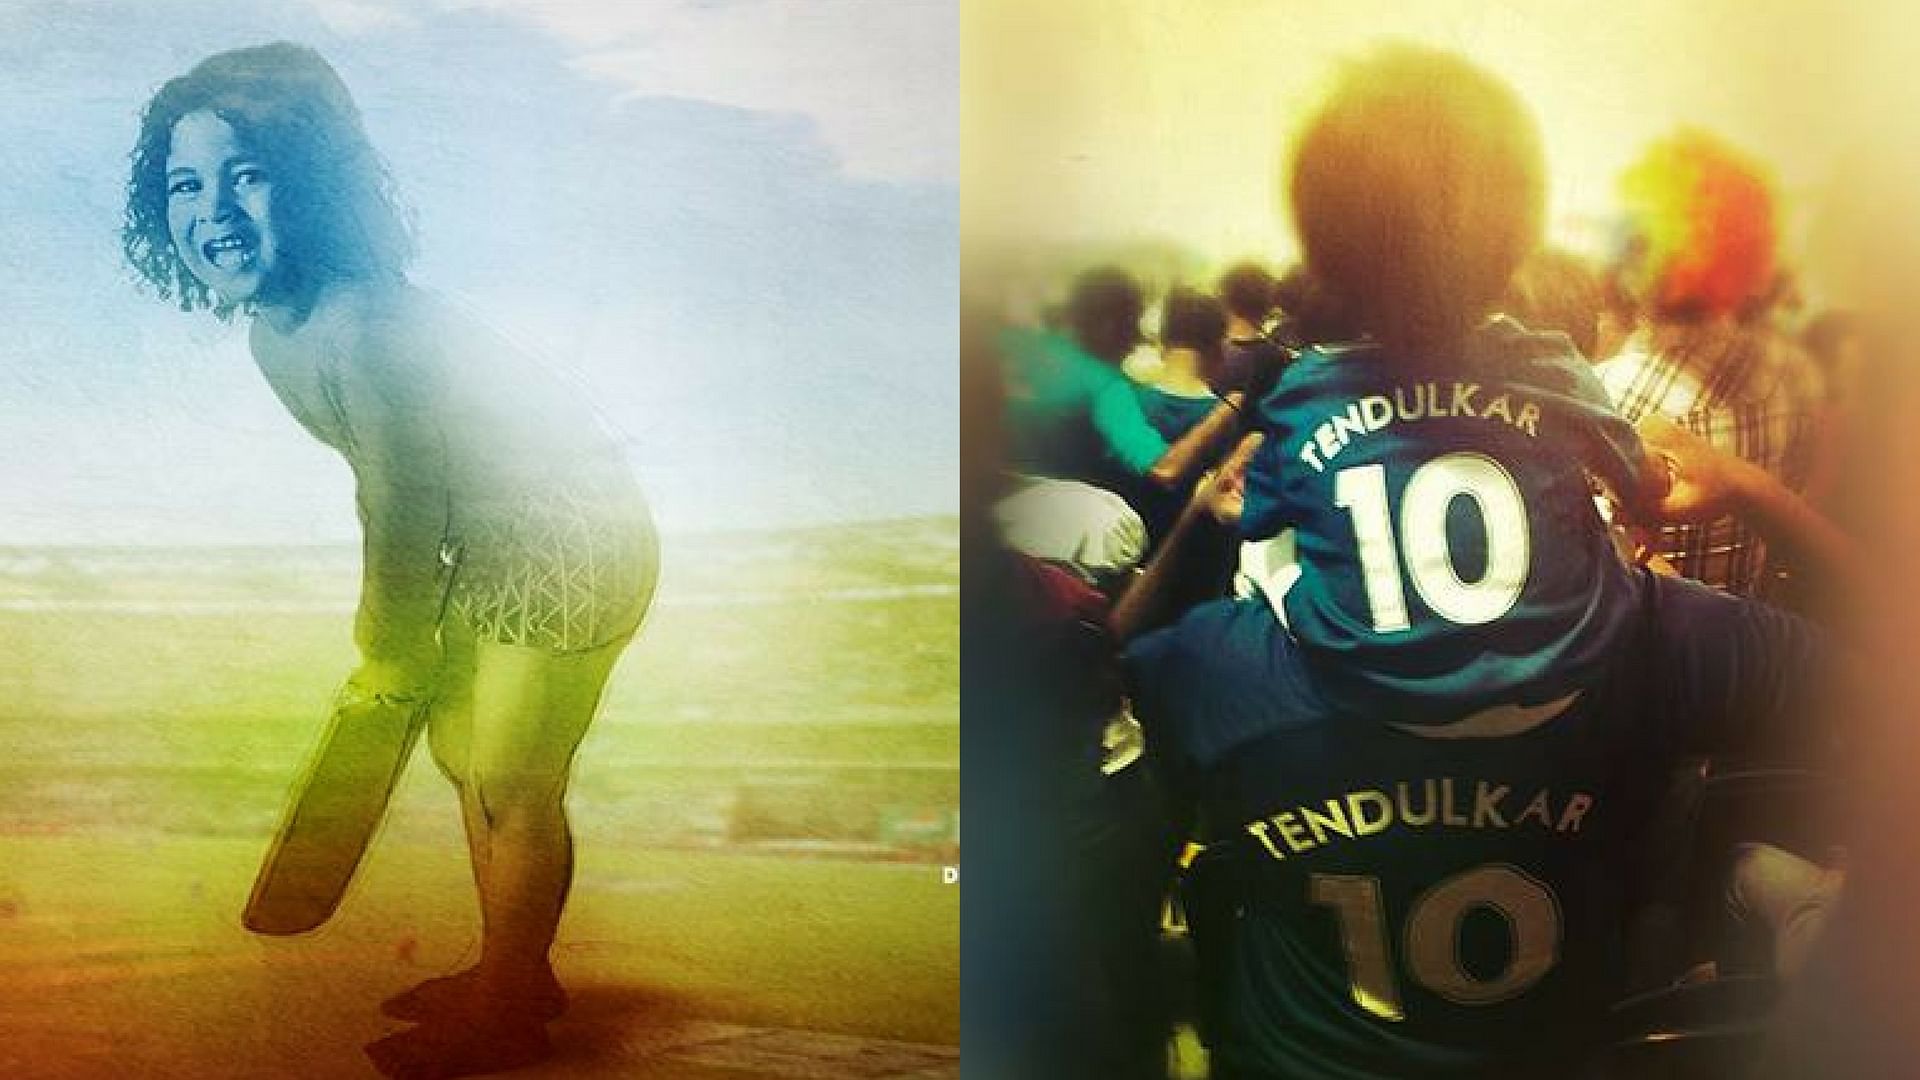 For 140 minutes of the Sachin film, a parallel track ran in my mind – of the memories I associated with the events unfolding on the screen.